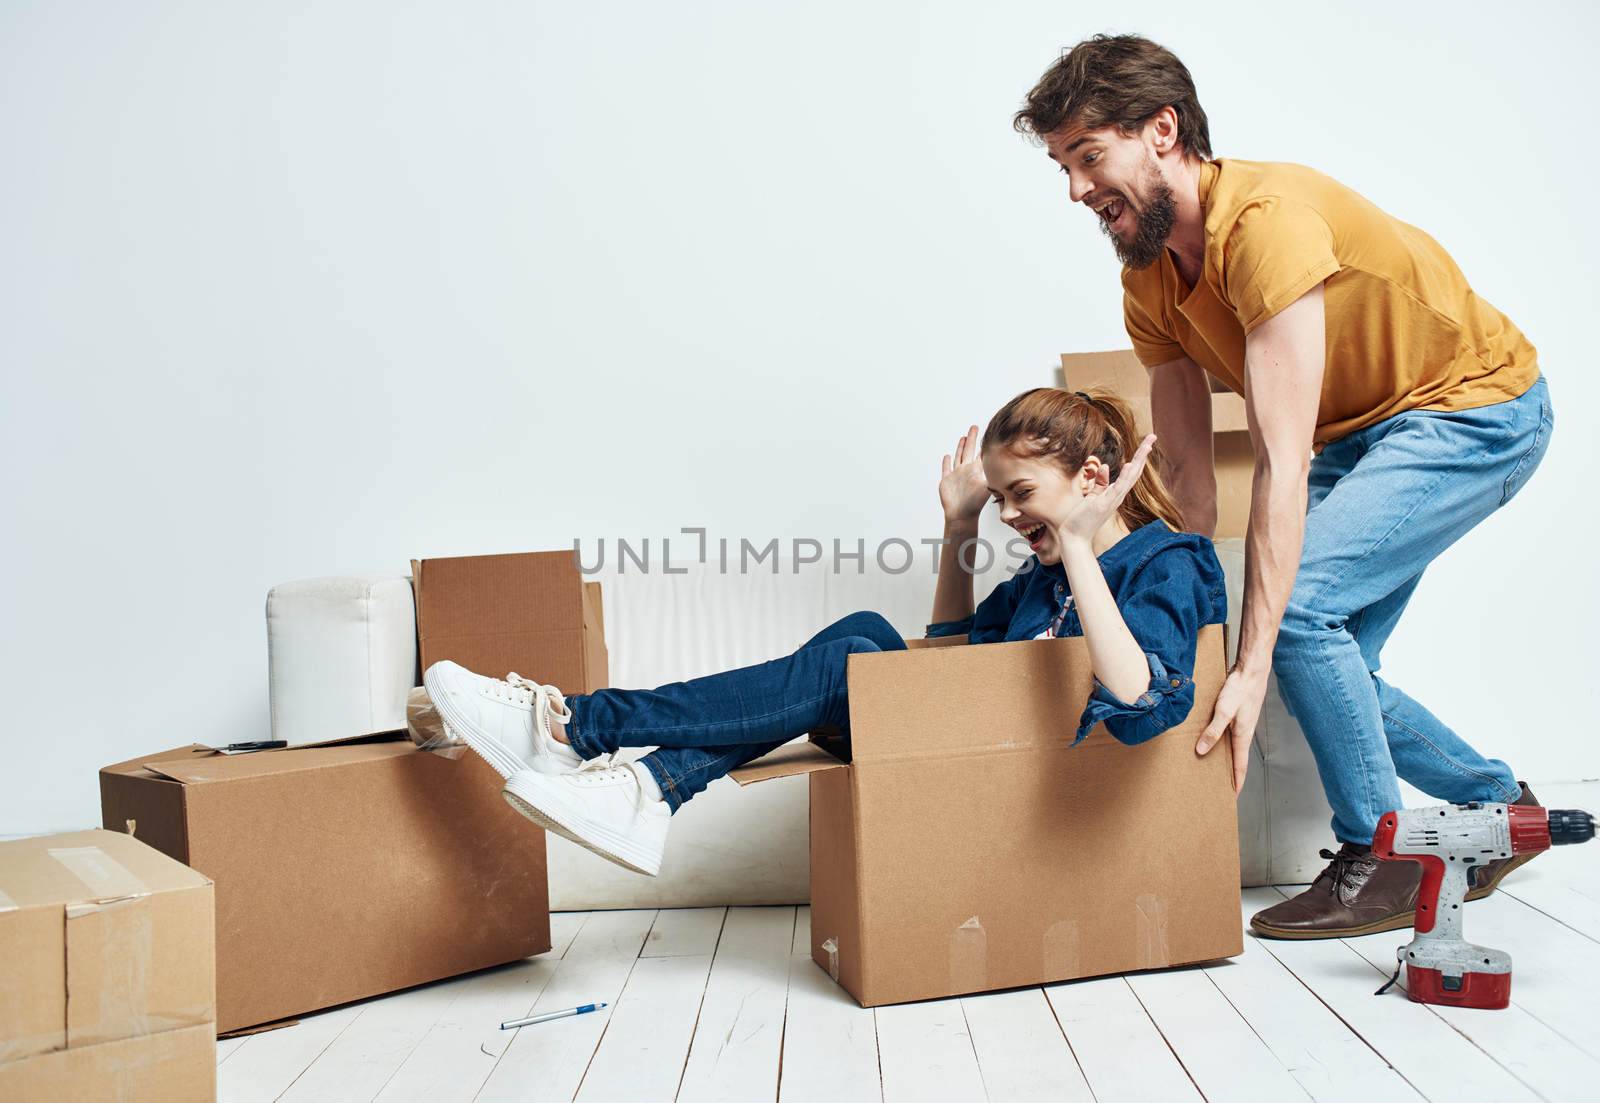 man and woman on white sofa interior cardboard boxes lifestyle. High quality photo